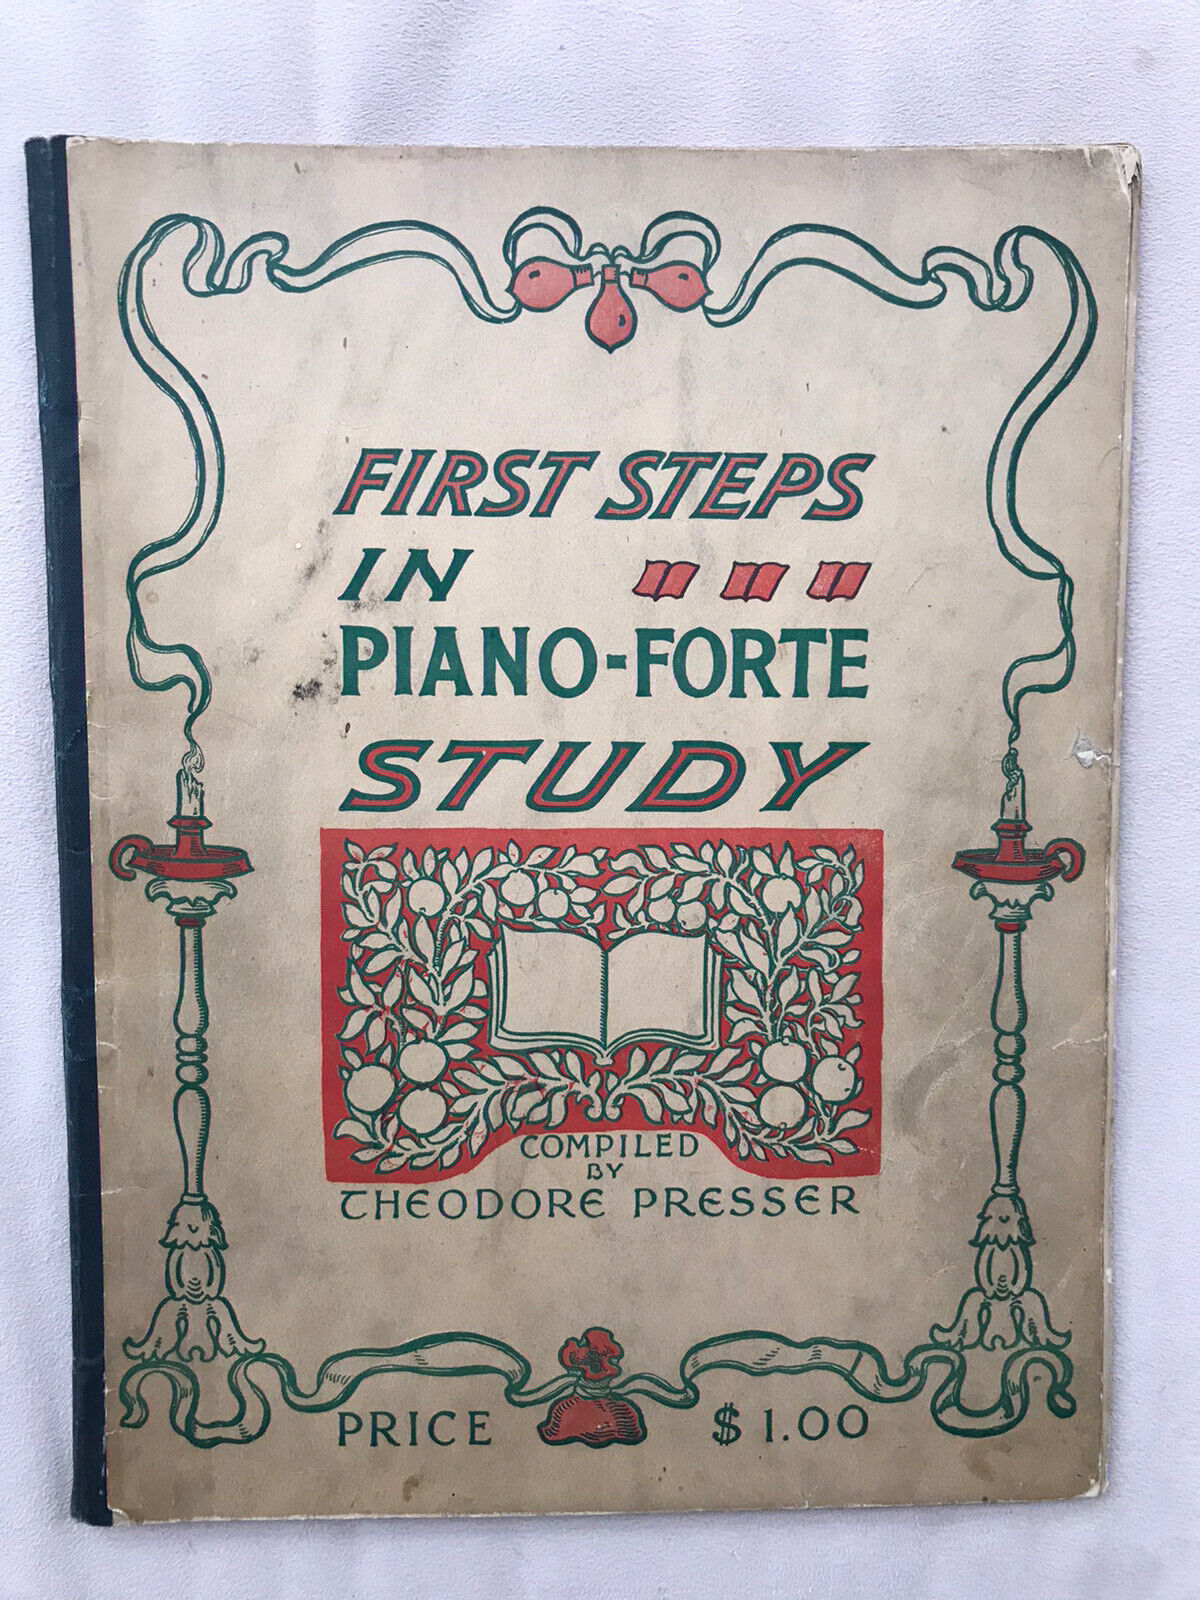 RARE 1900 Antique “First Steps In Piano-Forte Study” Piano Music Book